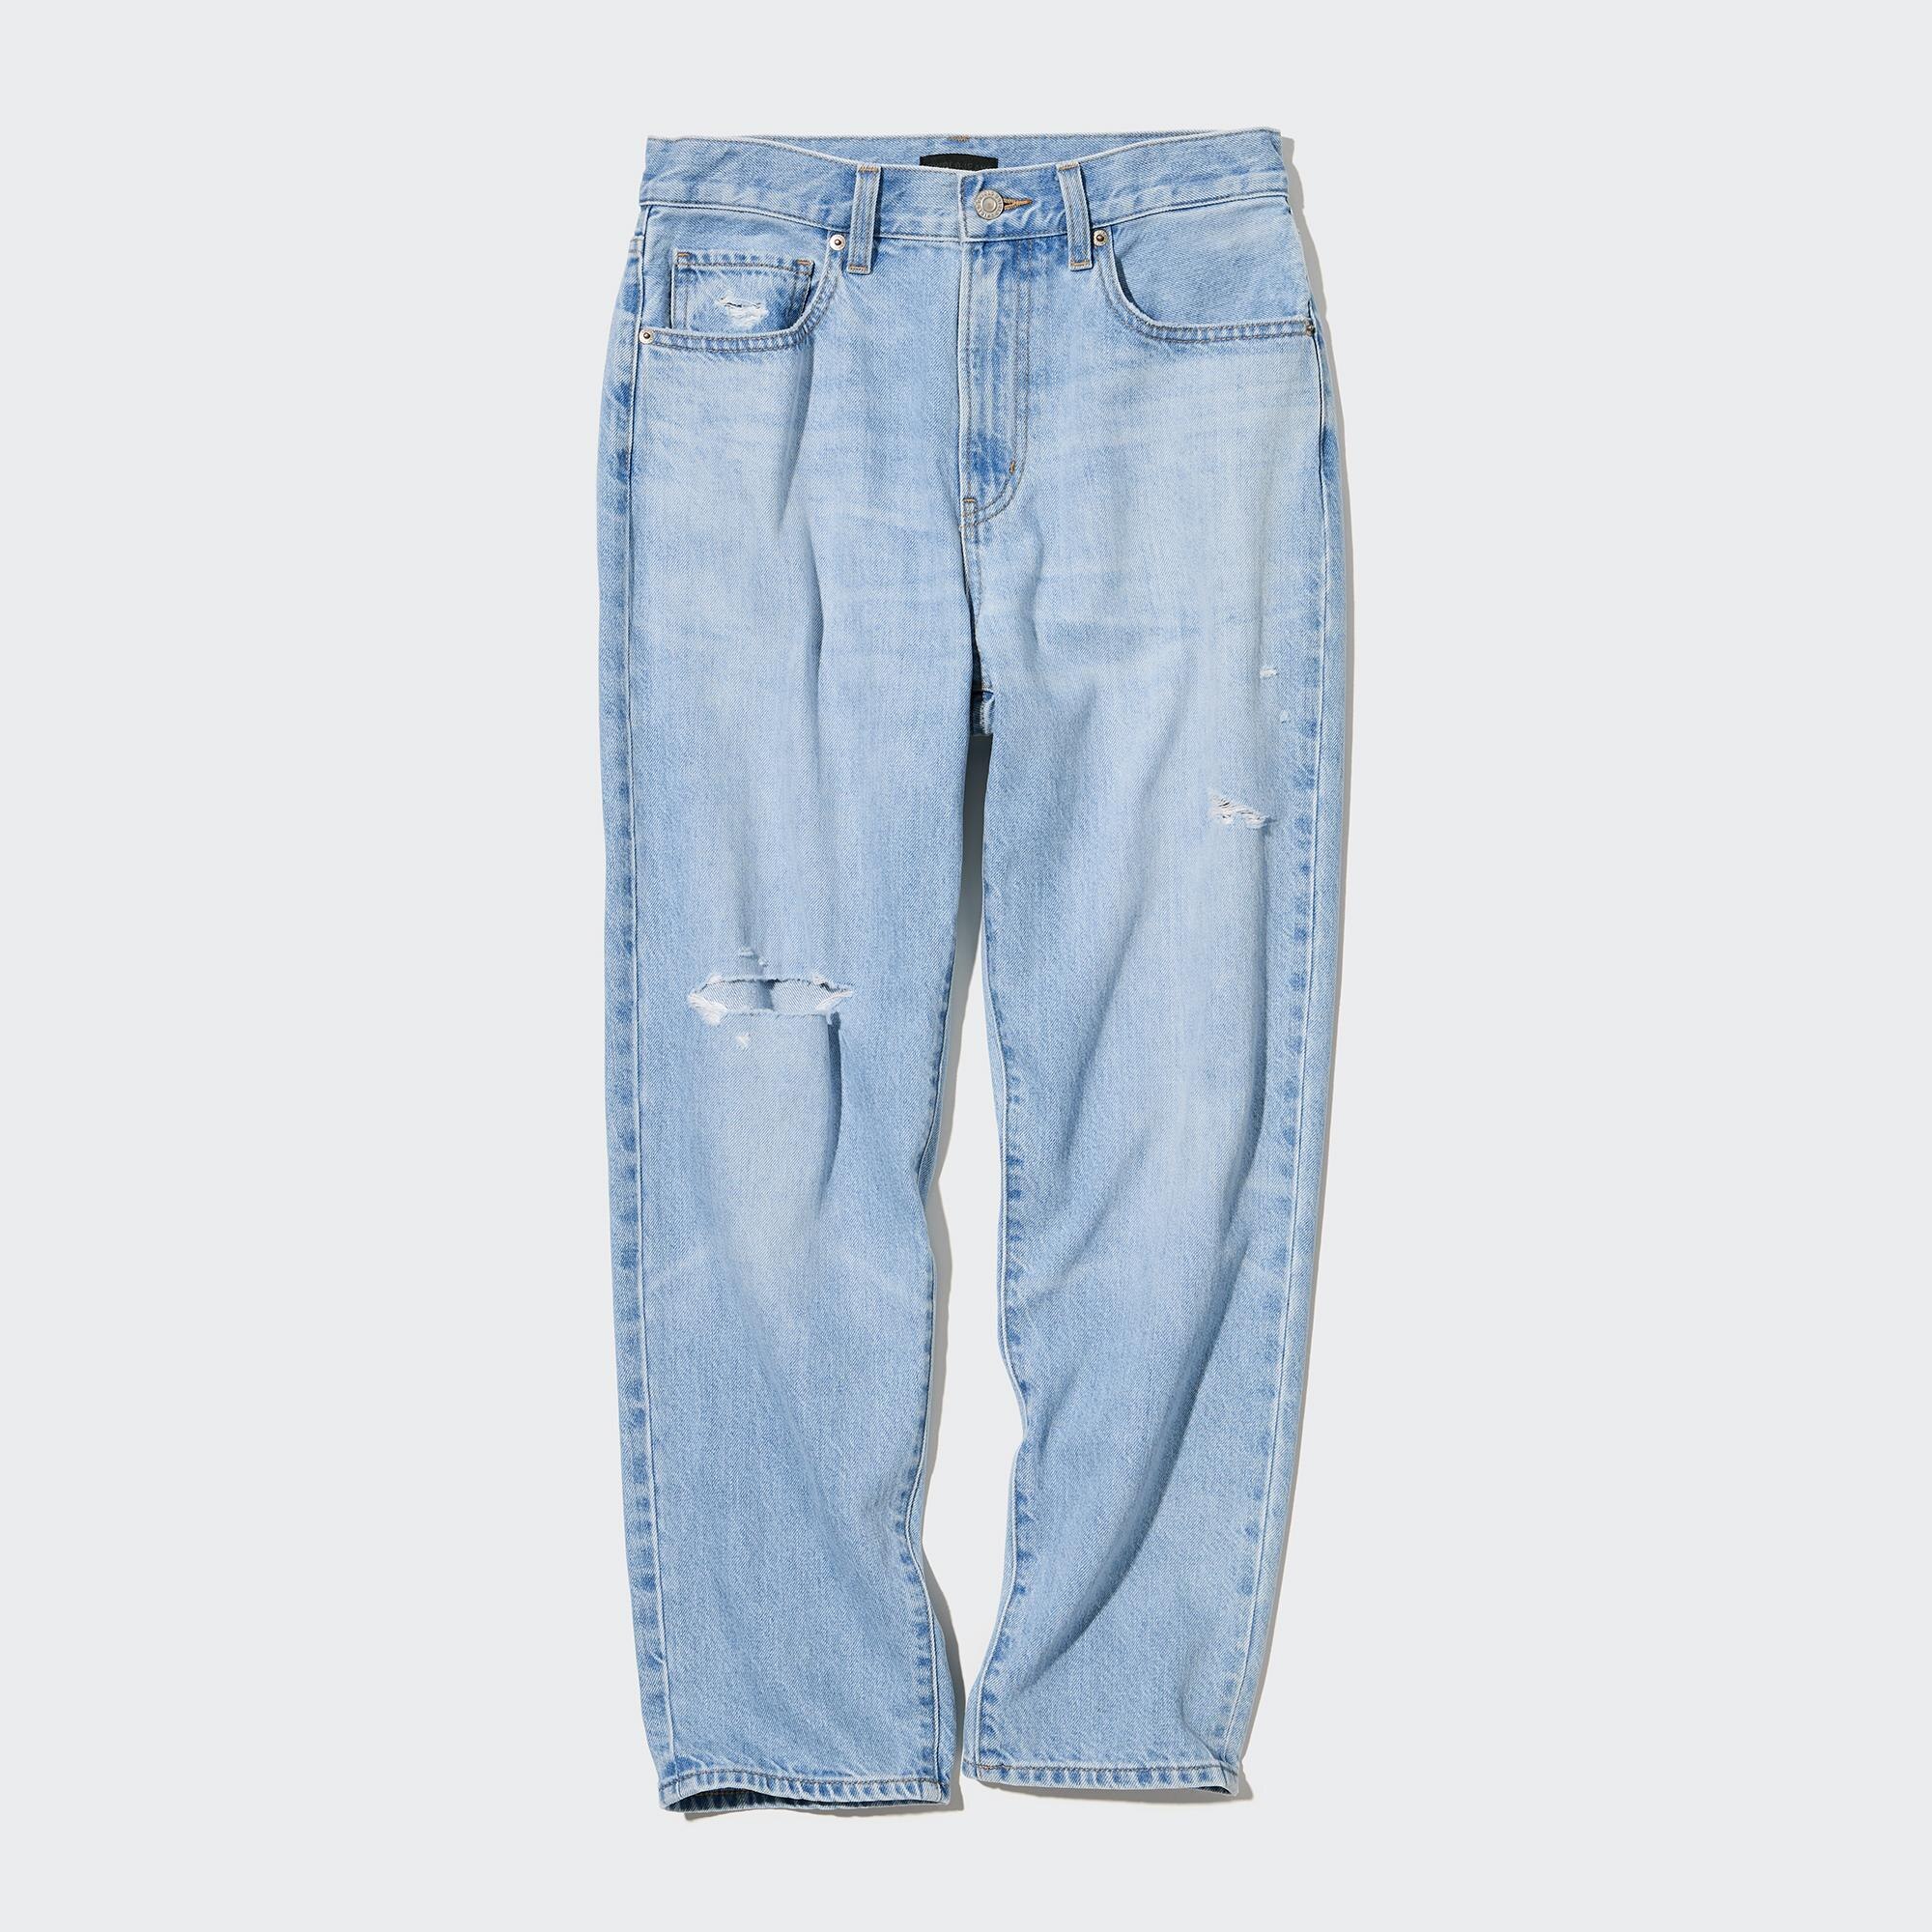 Uniqlo  Jeans  Uniqlo Slouch Tapered Ankle Jeans  Poshmark